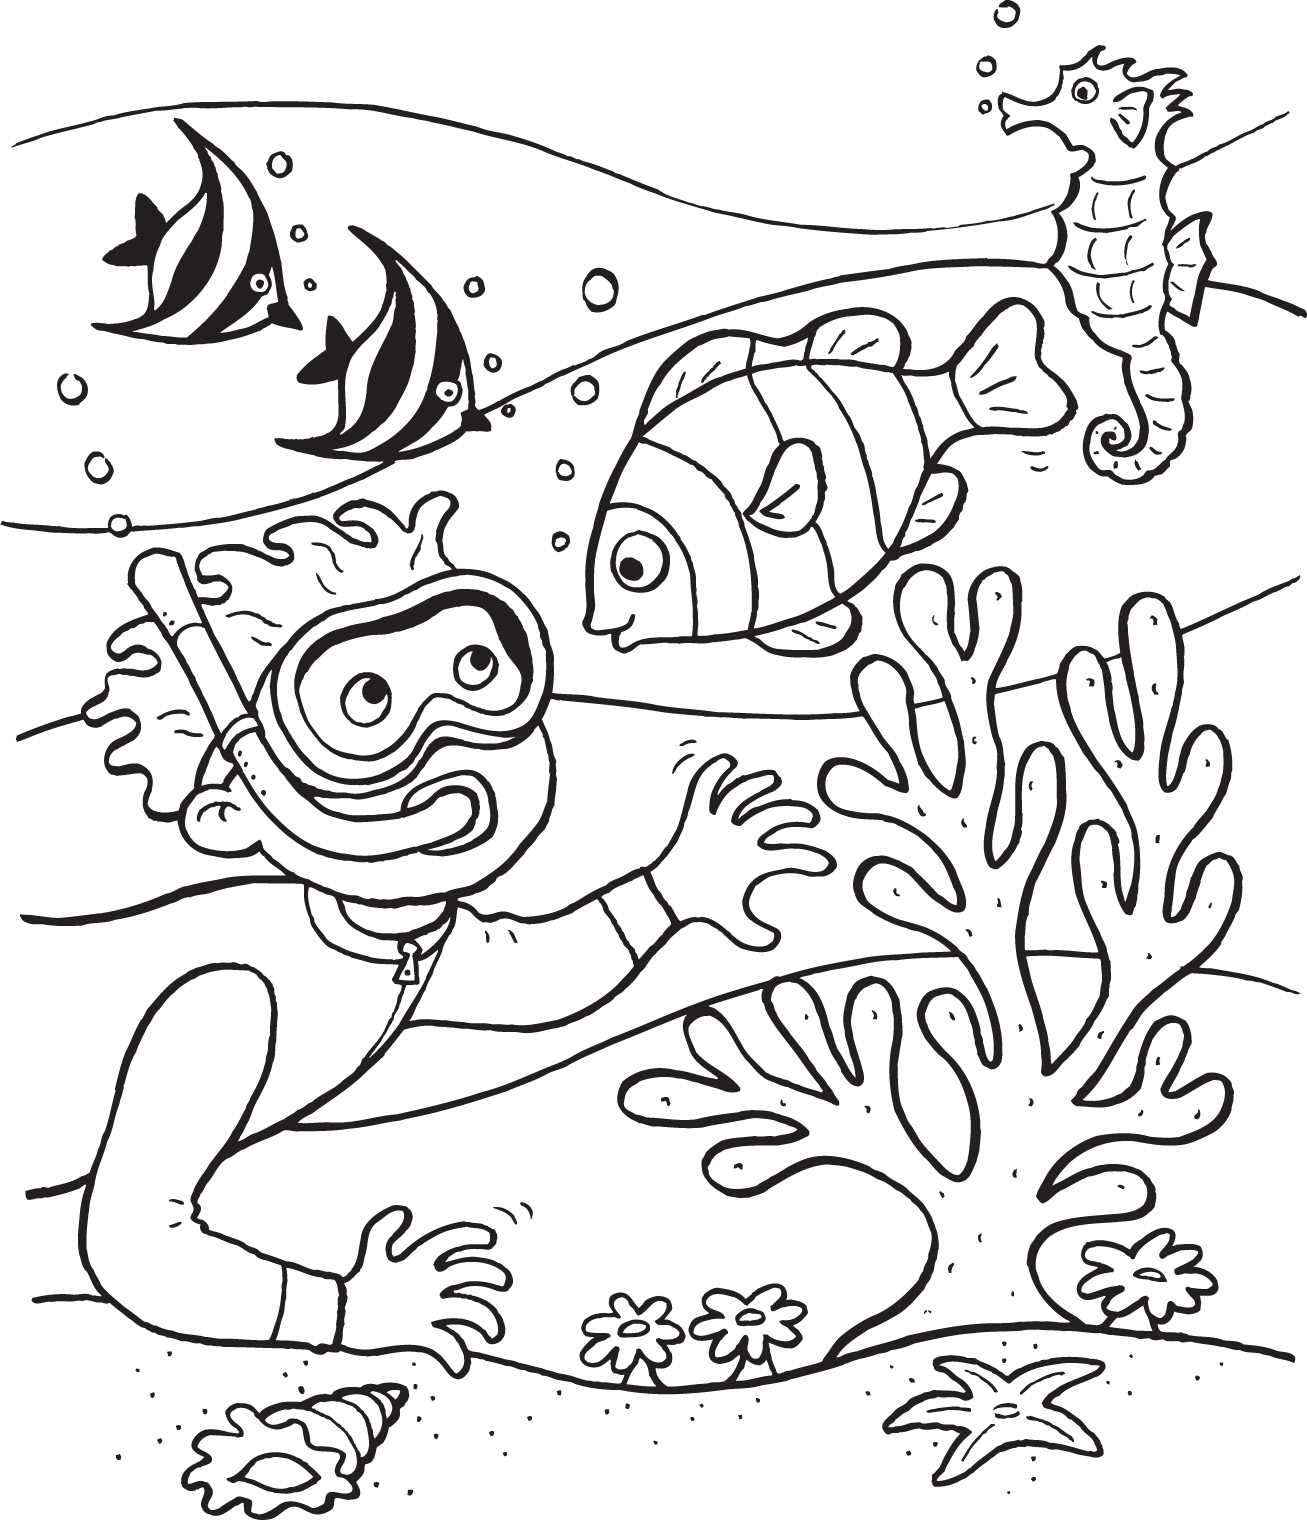 Ocean Life Coloring Pages Printable At GetColorings Free 